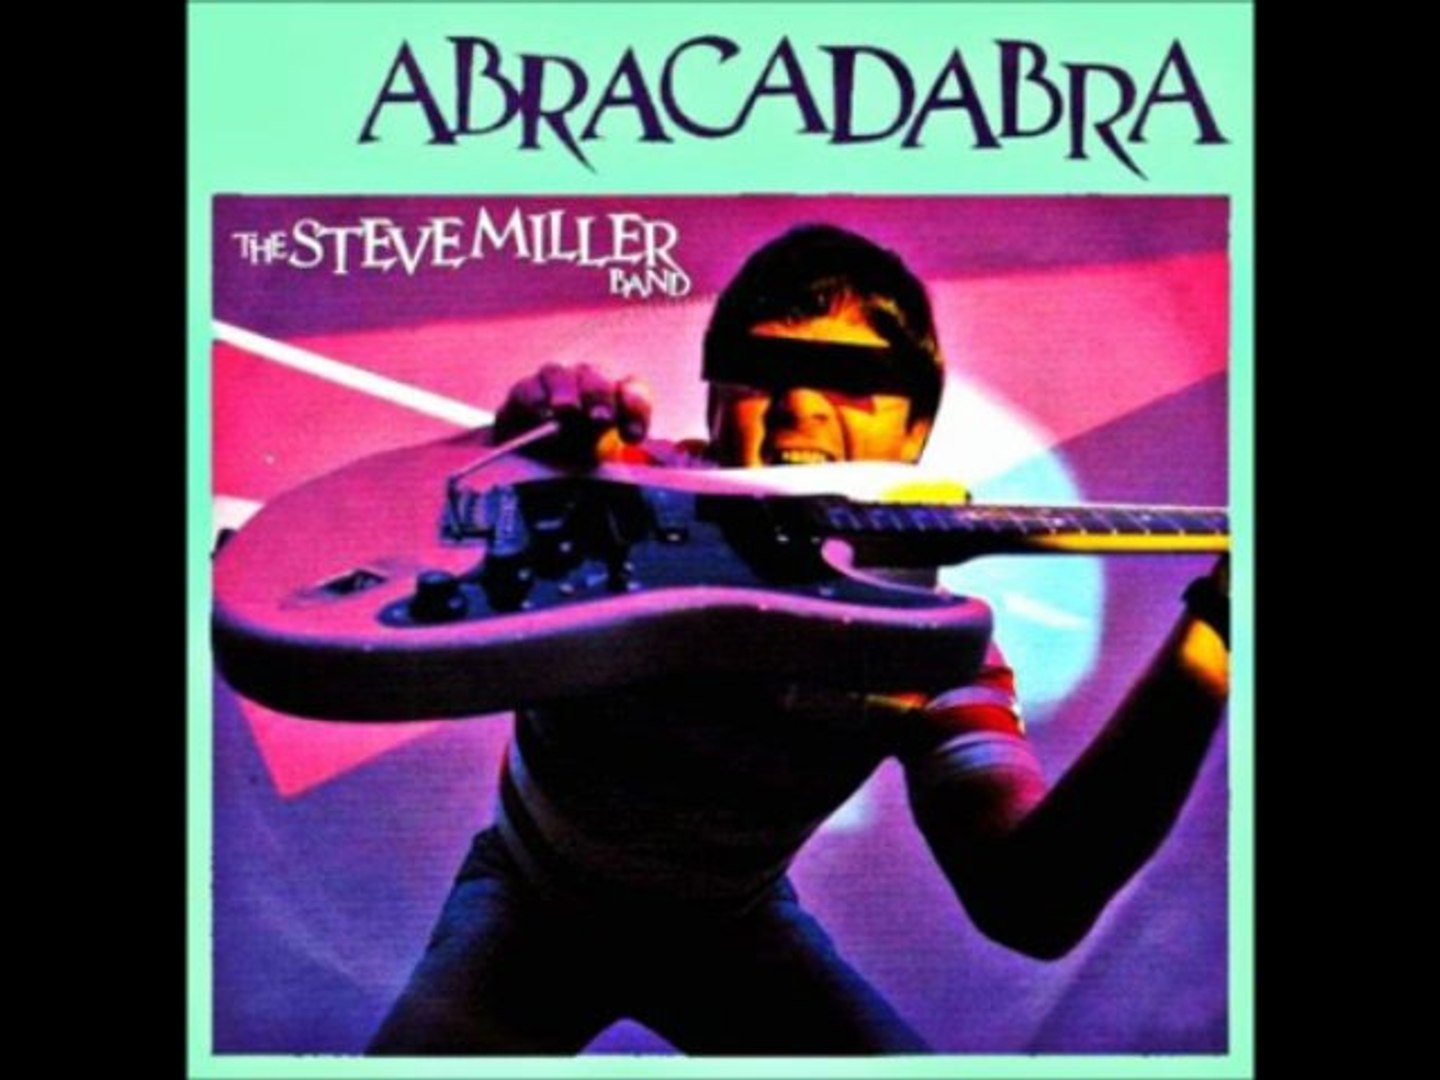 THE STEVE MILLER BAND - ABRACADABRA (12" atomix extended cut version) HQ -  video Dailymotion